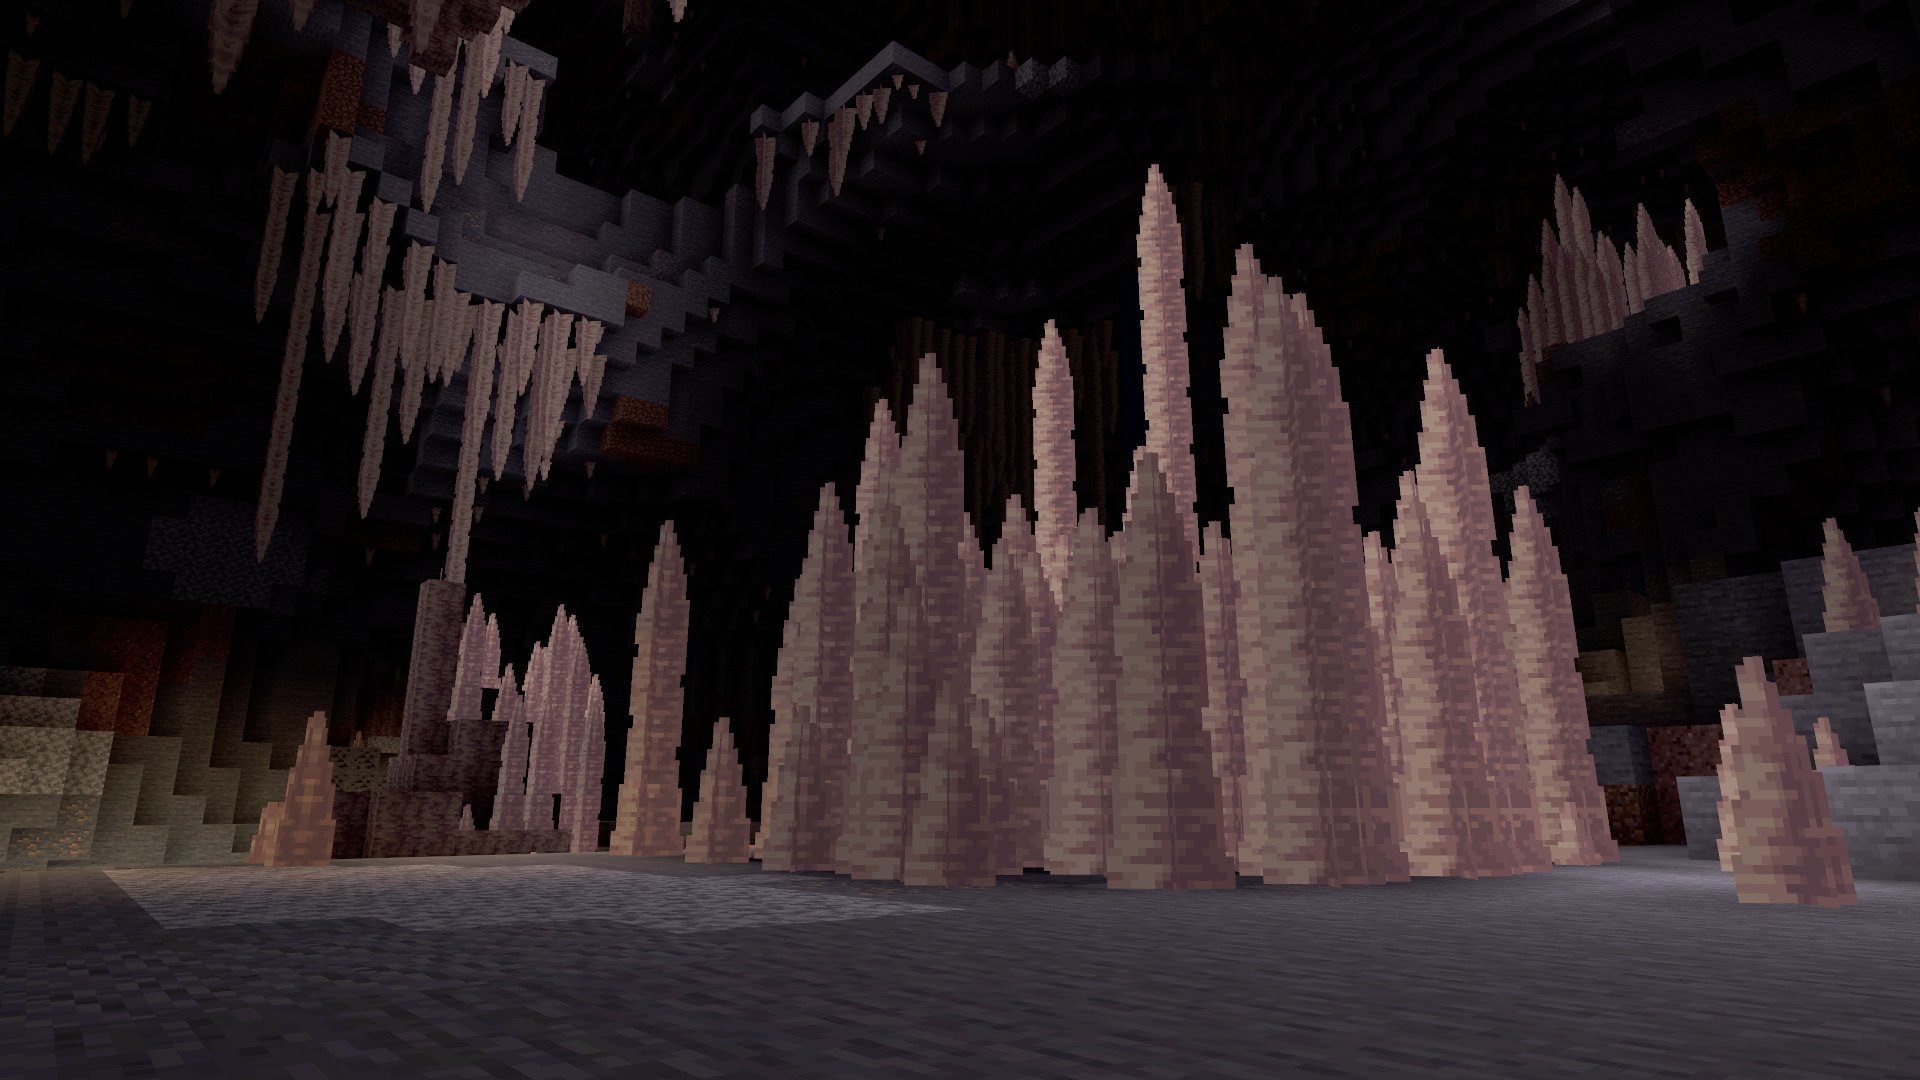 Minecraft 1.16.5 Release Candidate 1 is out, another Caves and Cliffs  snapshot hits next week